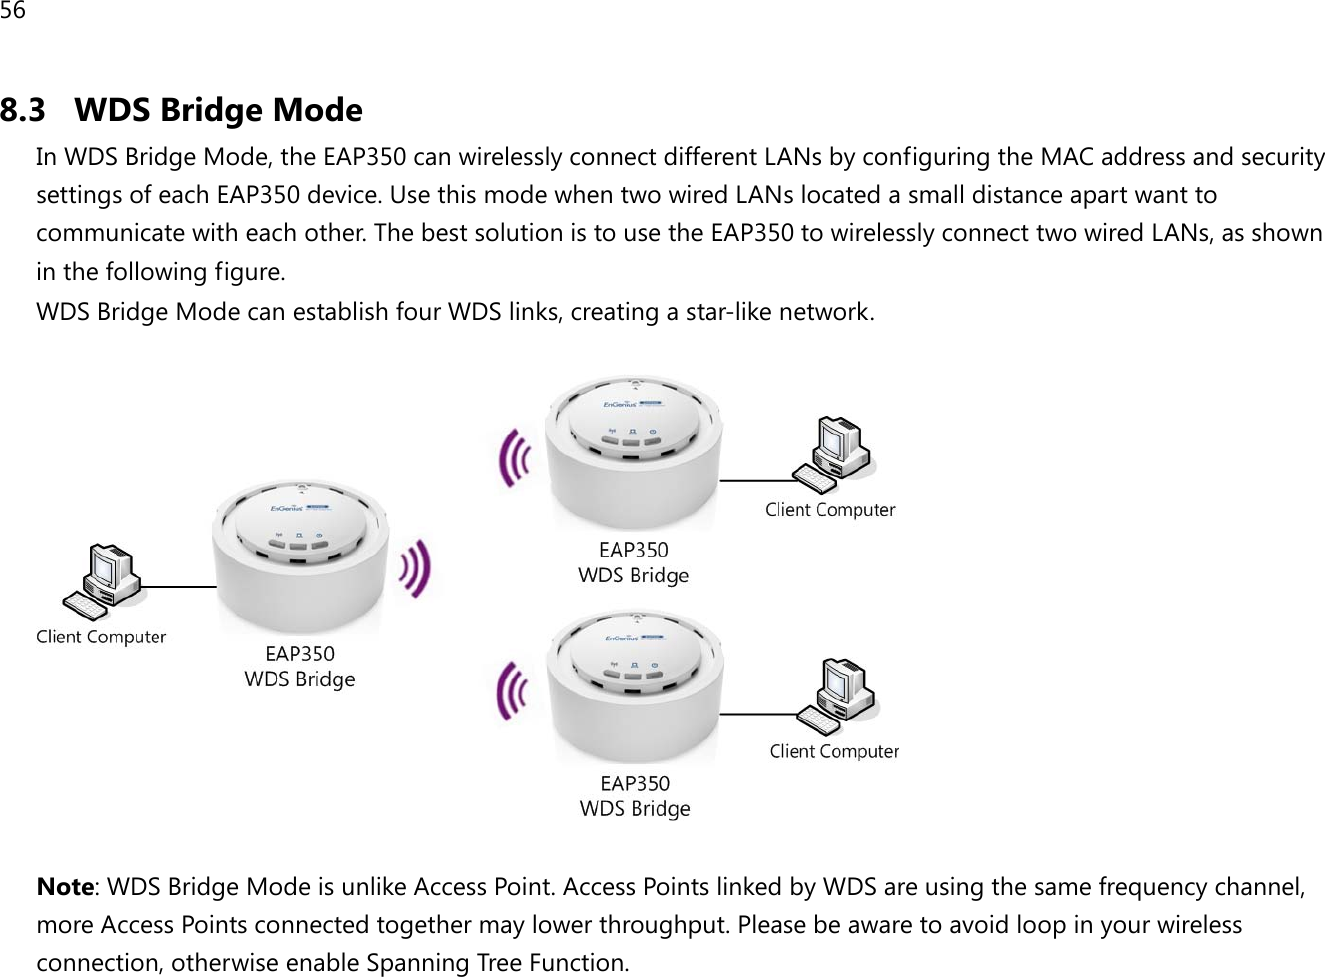 56  8.3 WDS Bridge Mode In WDS Bridge Mode, the EAP350 can wirelessly connect different LANs by configuring the MAC address and security settings of each EAP350 device. Use this mode when two wired LANs located a small distance apart want to communicate with each other. The best solution is to use the EAP350 to wirelessly connect two wired LANs, as shown in the following figure.  WDS Bridge Mode can establish four WDS links, creating a star-like network.     Note: WDS Bridge Mode is unlike Access Point. Access Points linked by WDS are using the same frequency channel, more Access Points connected together may lower throughput. Please be aware to avoid loop in your wireless connection, otherwise enable Spanning Tree Function. 